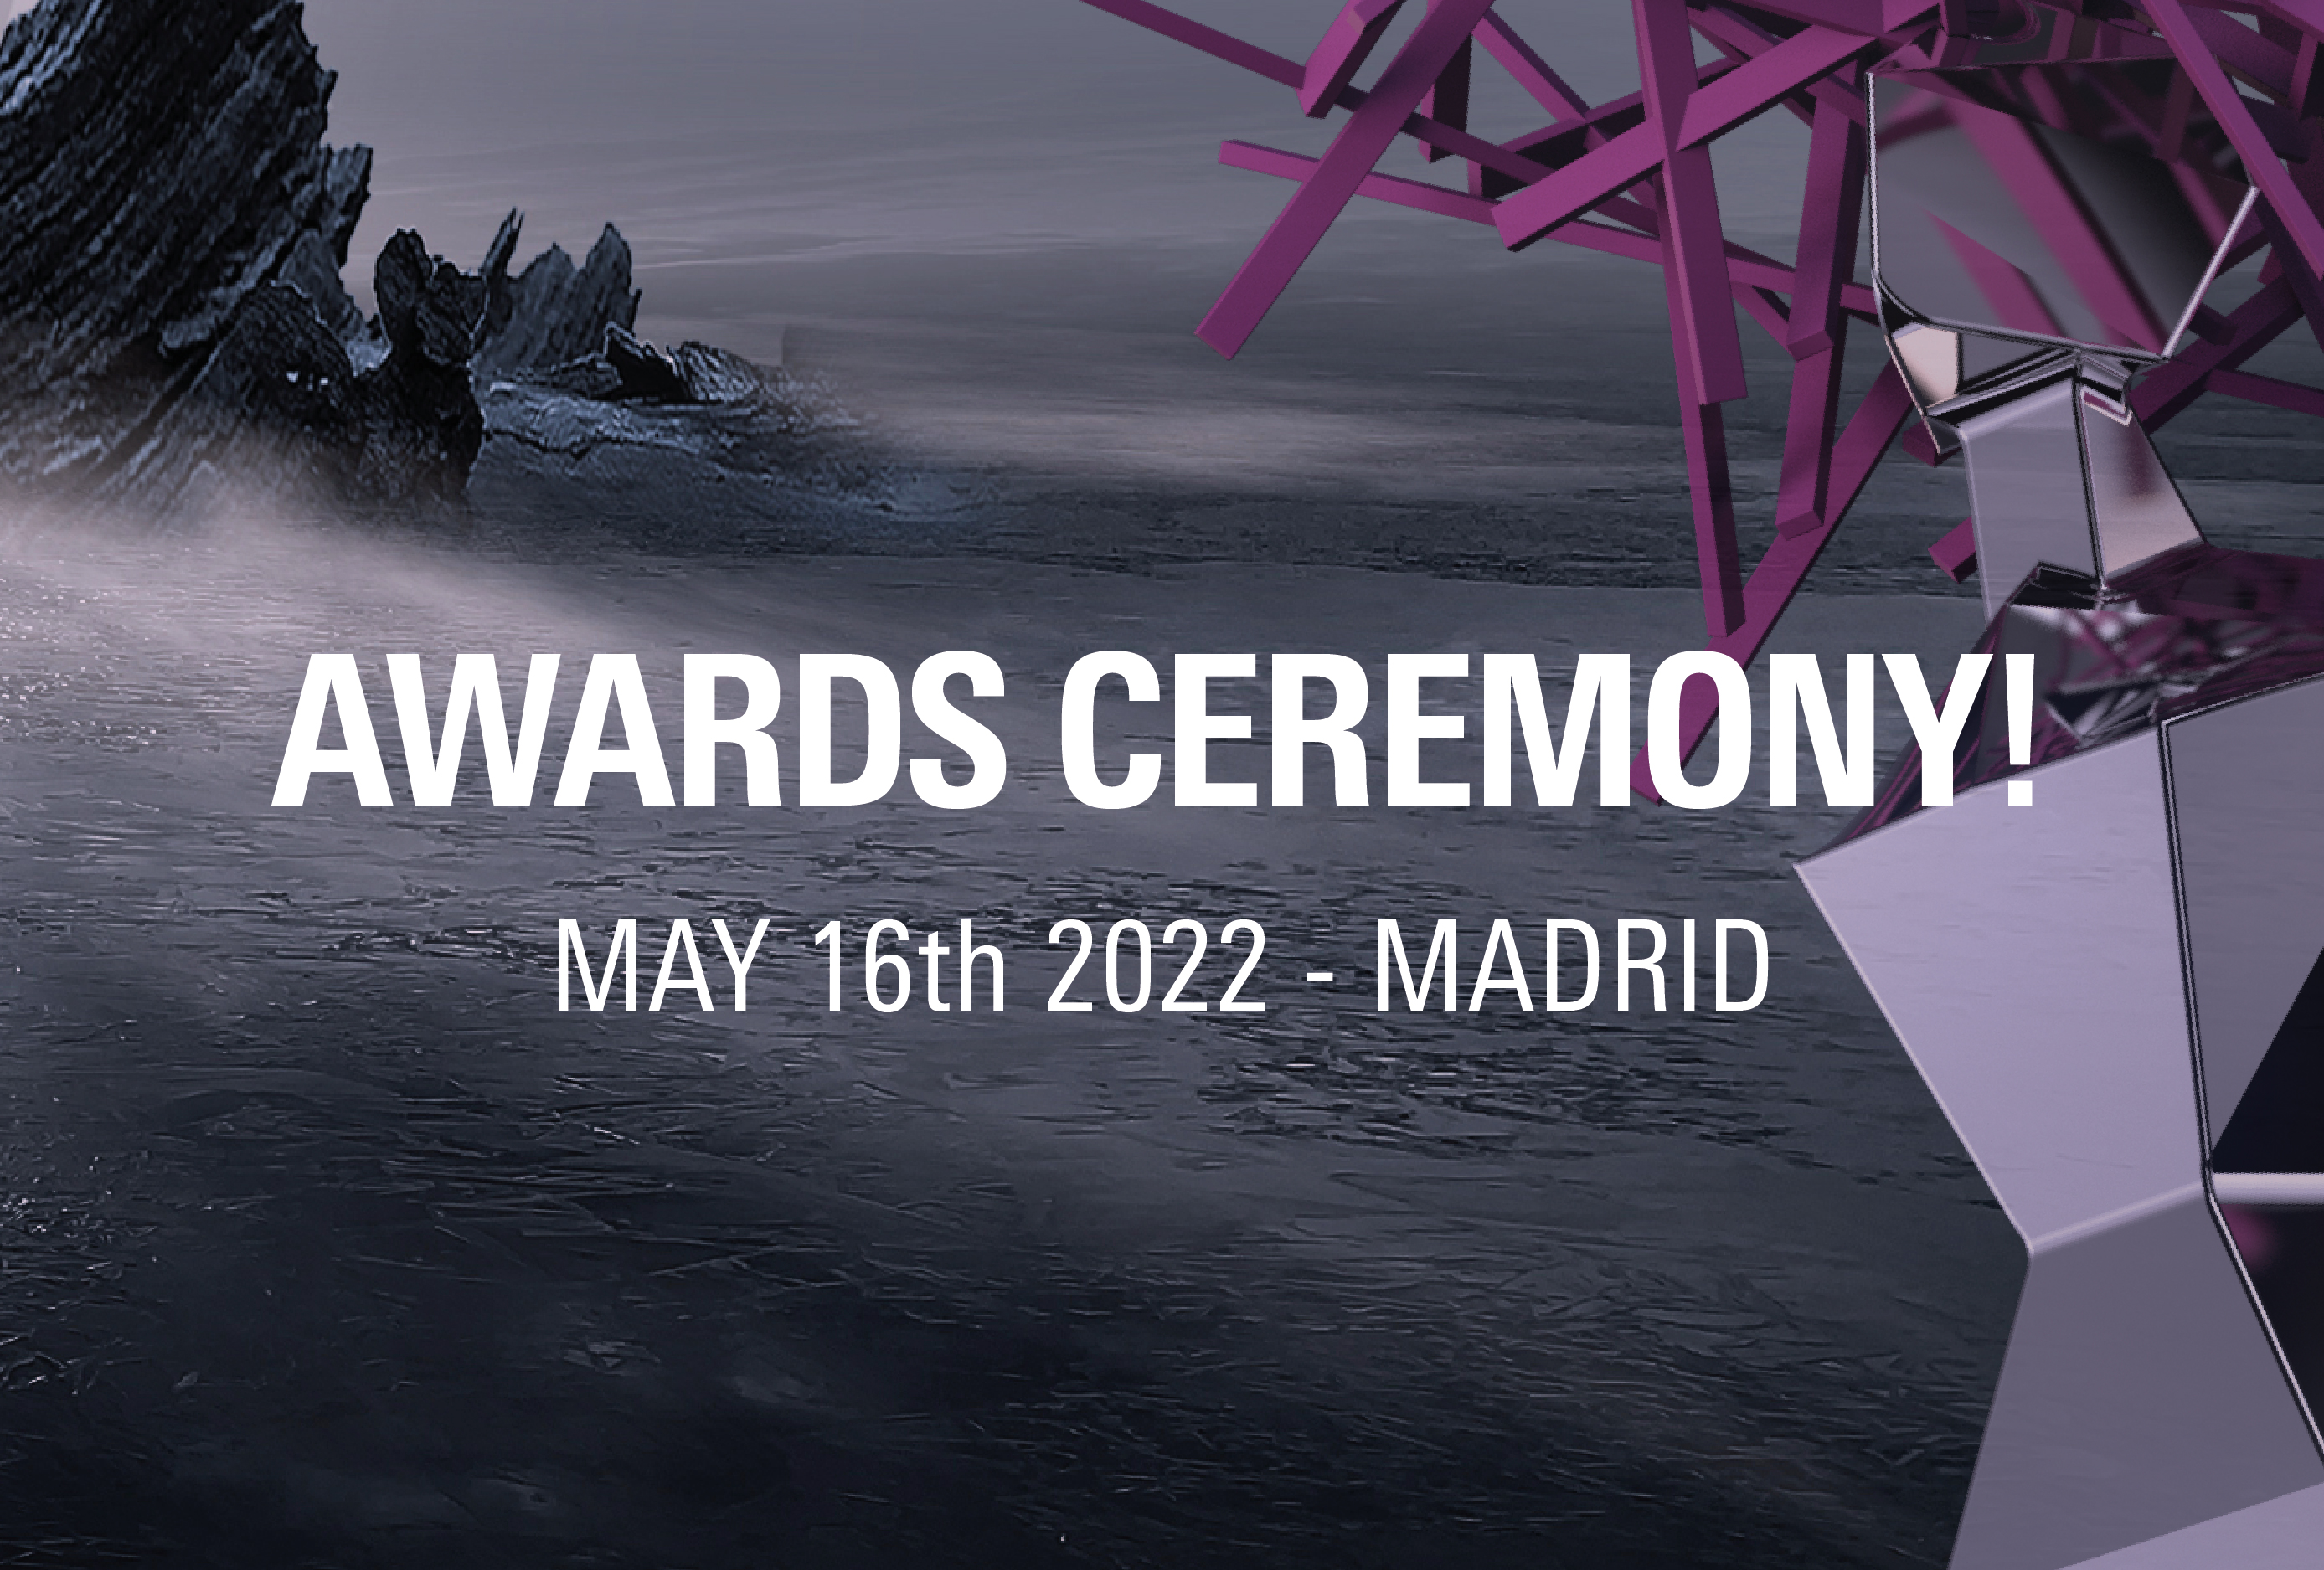 International Hairdressing Awards announce the date of the 2022 awards ceremony